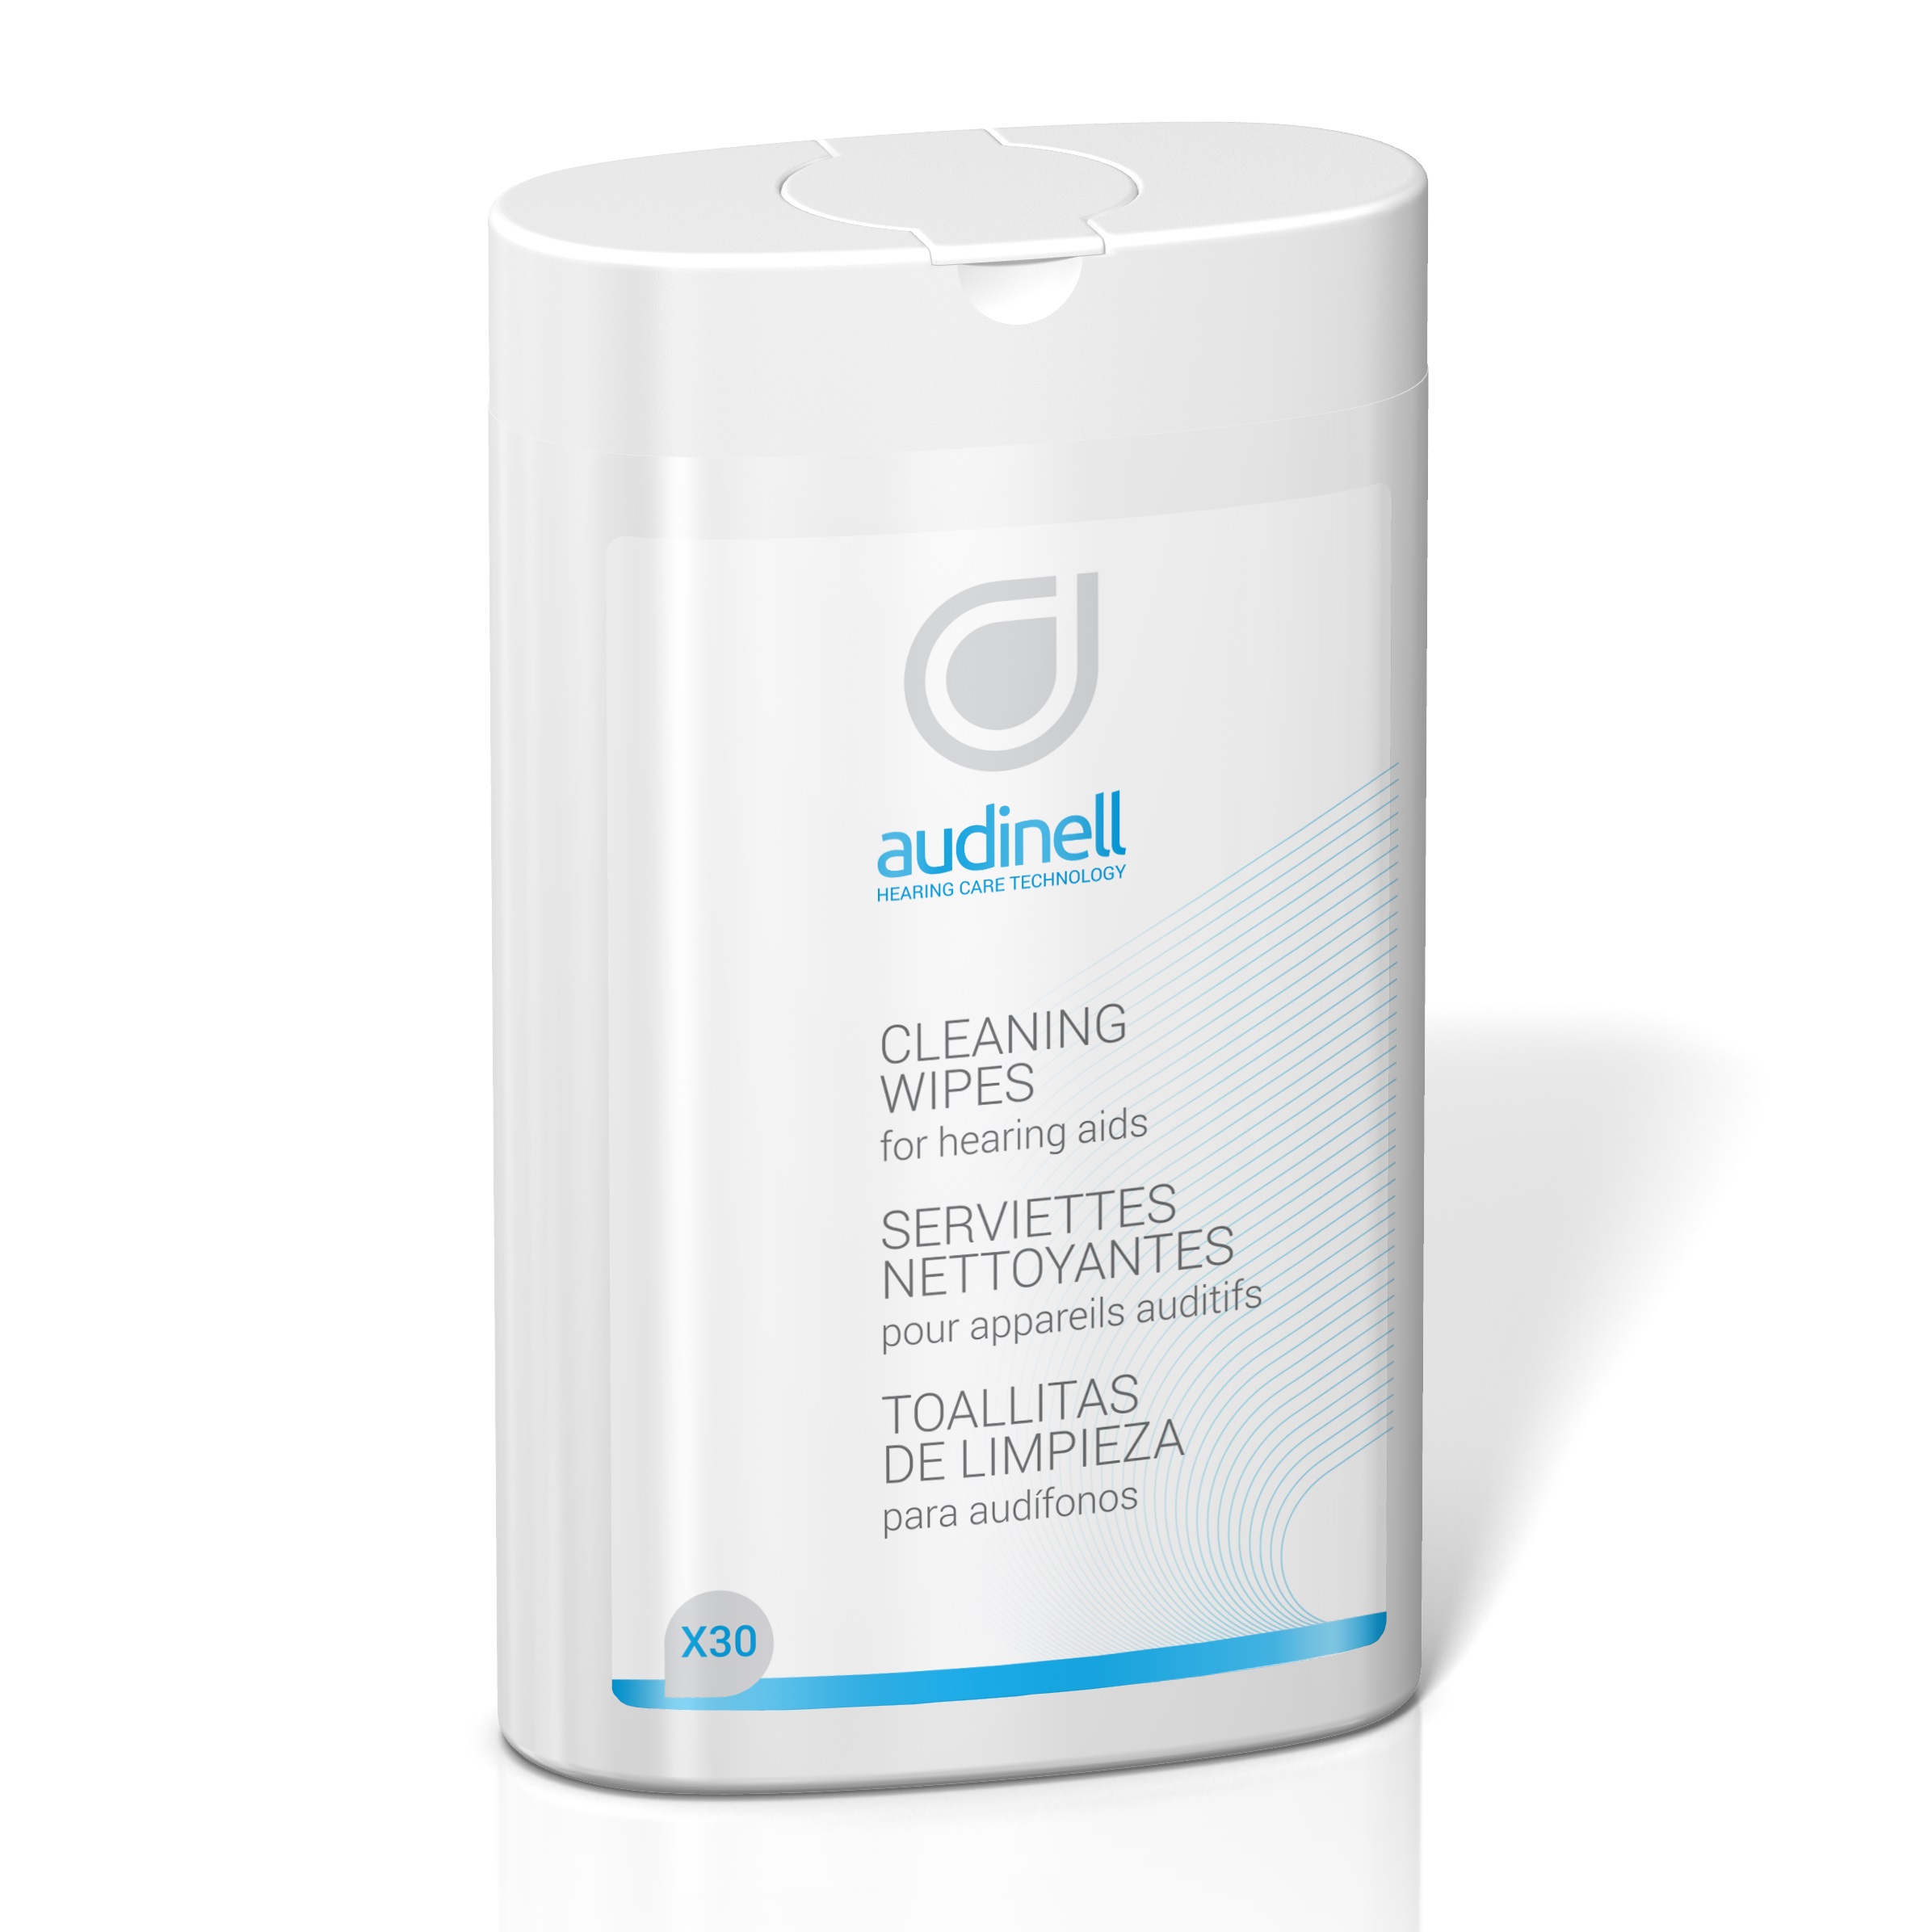 Audinell Cleaning Wipes - 30 Wipe Canister